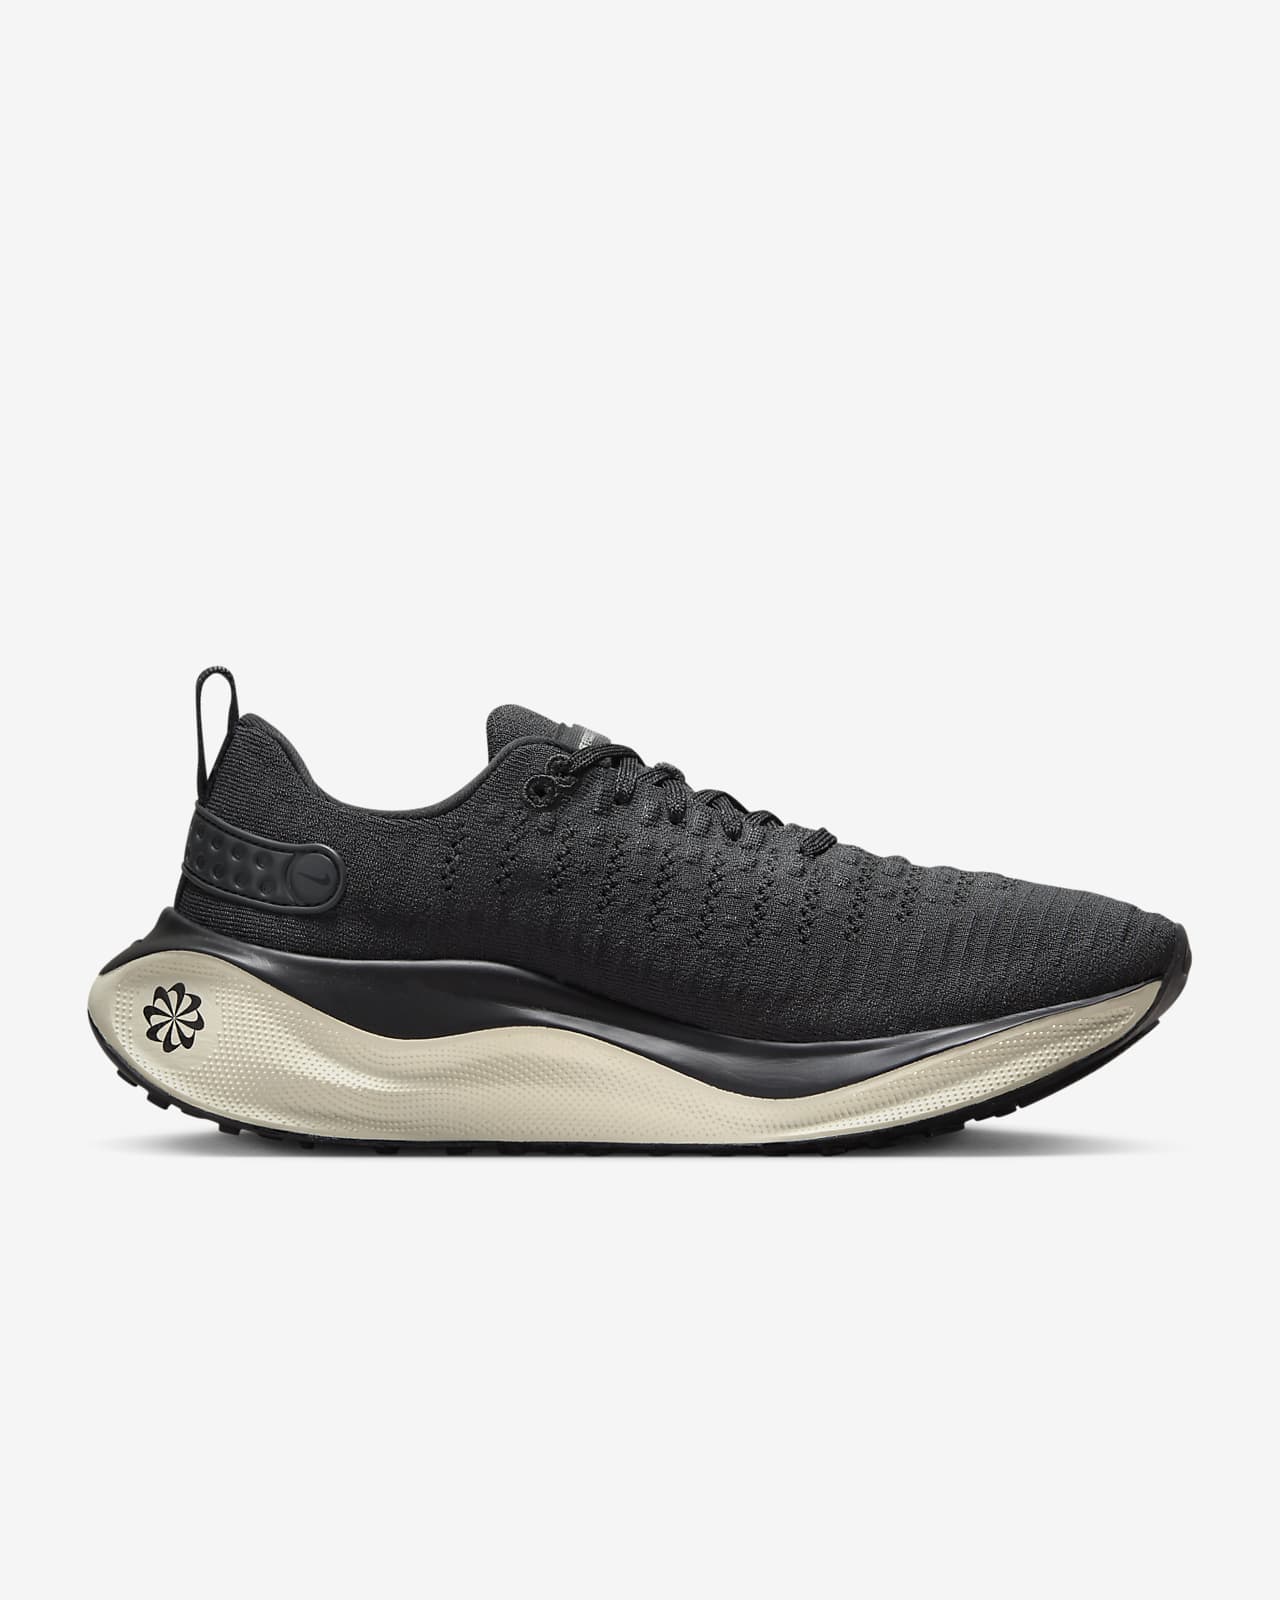 Black Suede Roots Runner Sneakers - GBNY